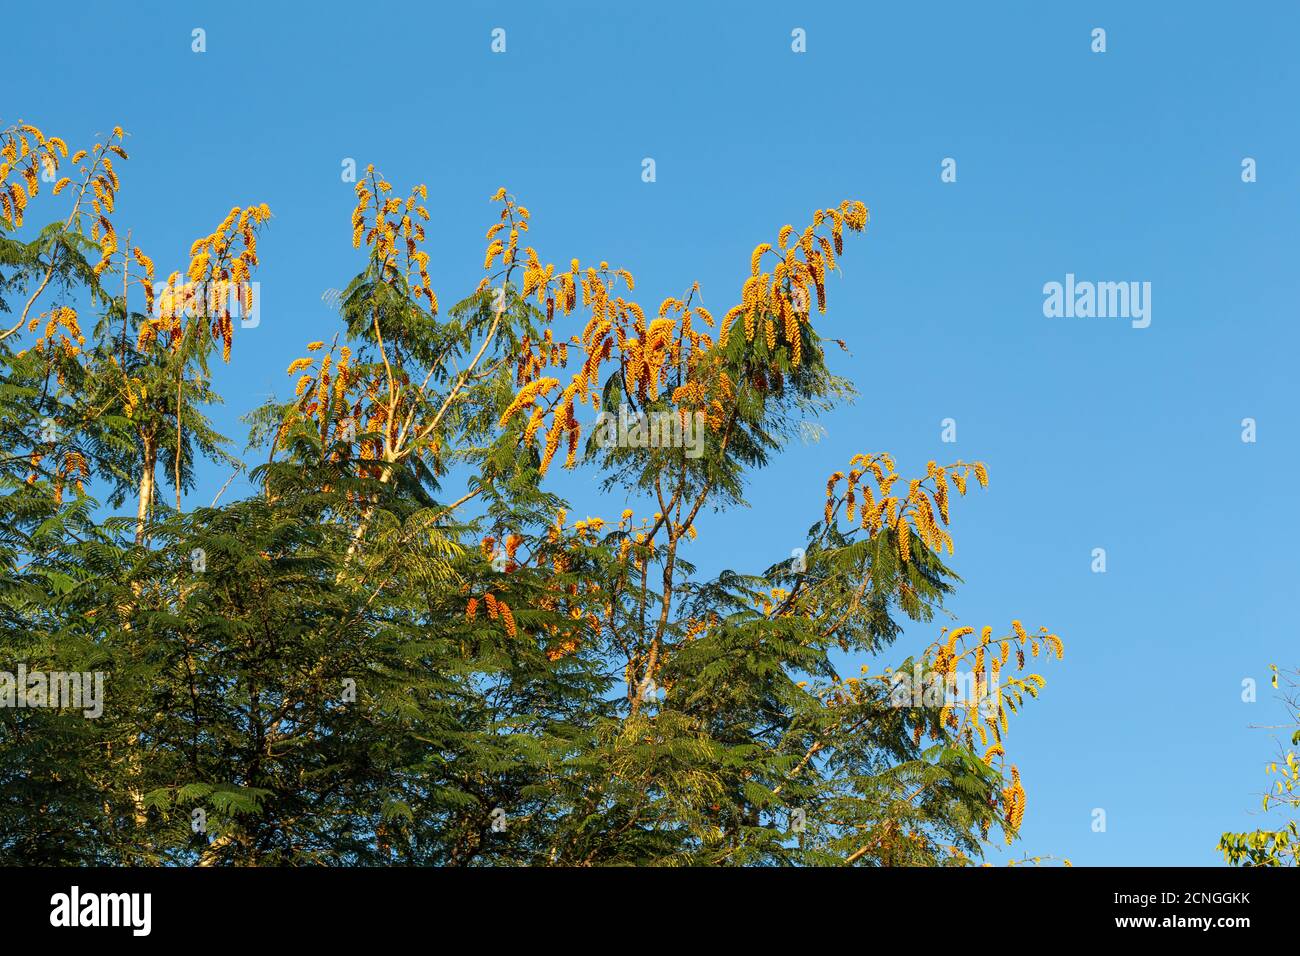 A tree with orange flowers and a blue sky in the background Stock Photo